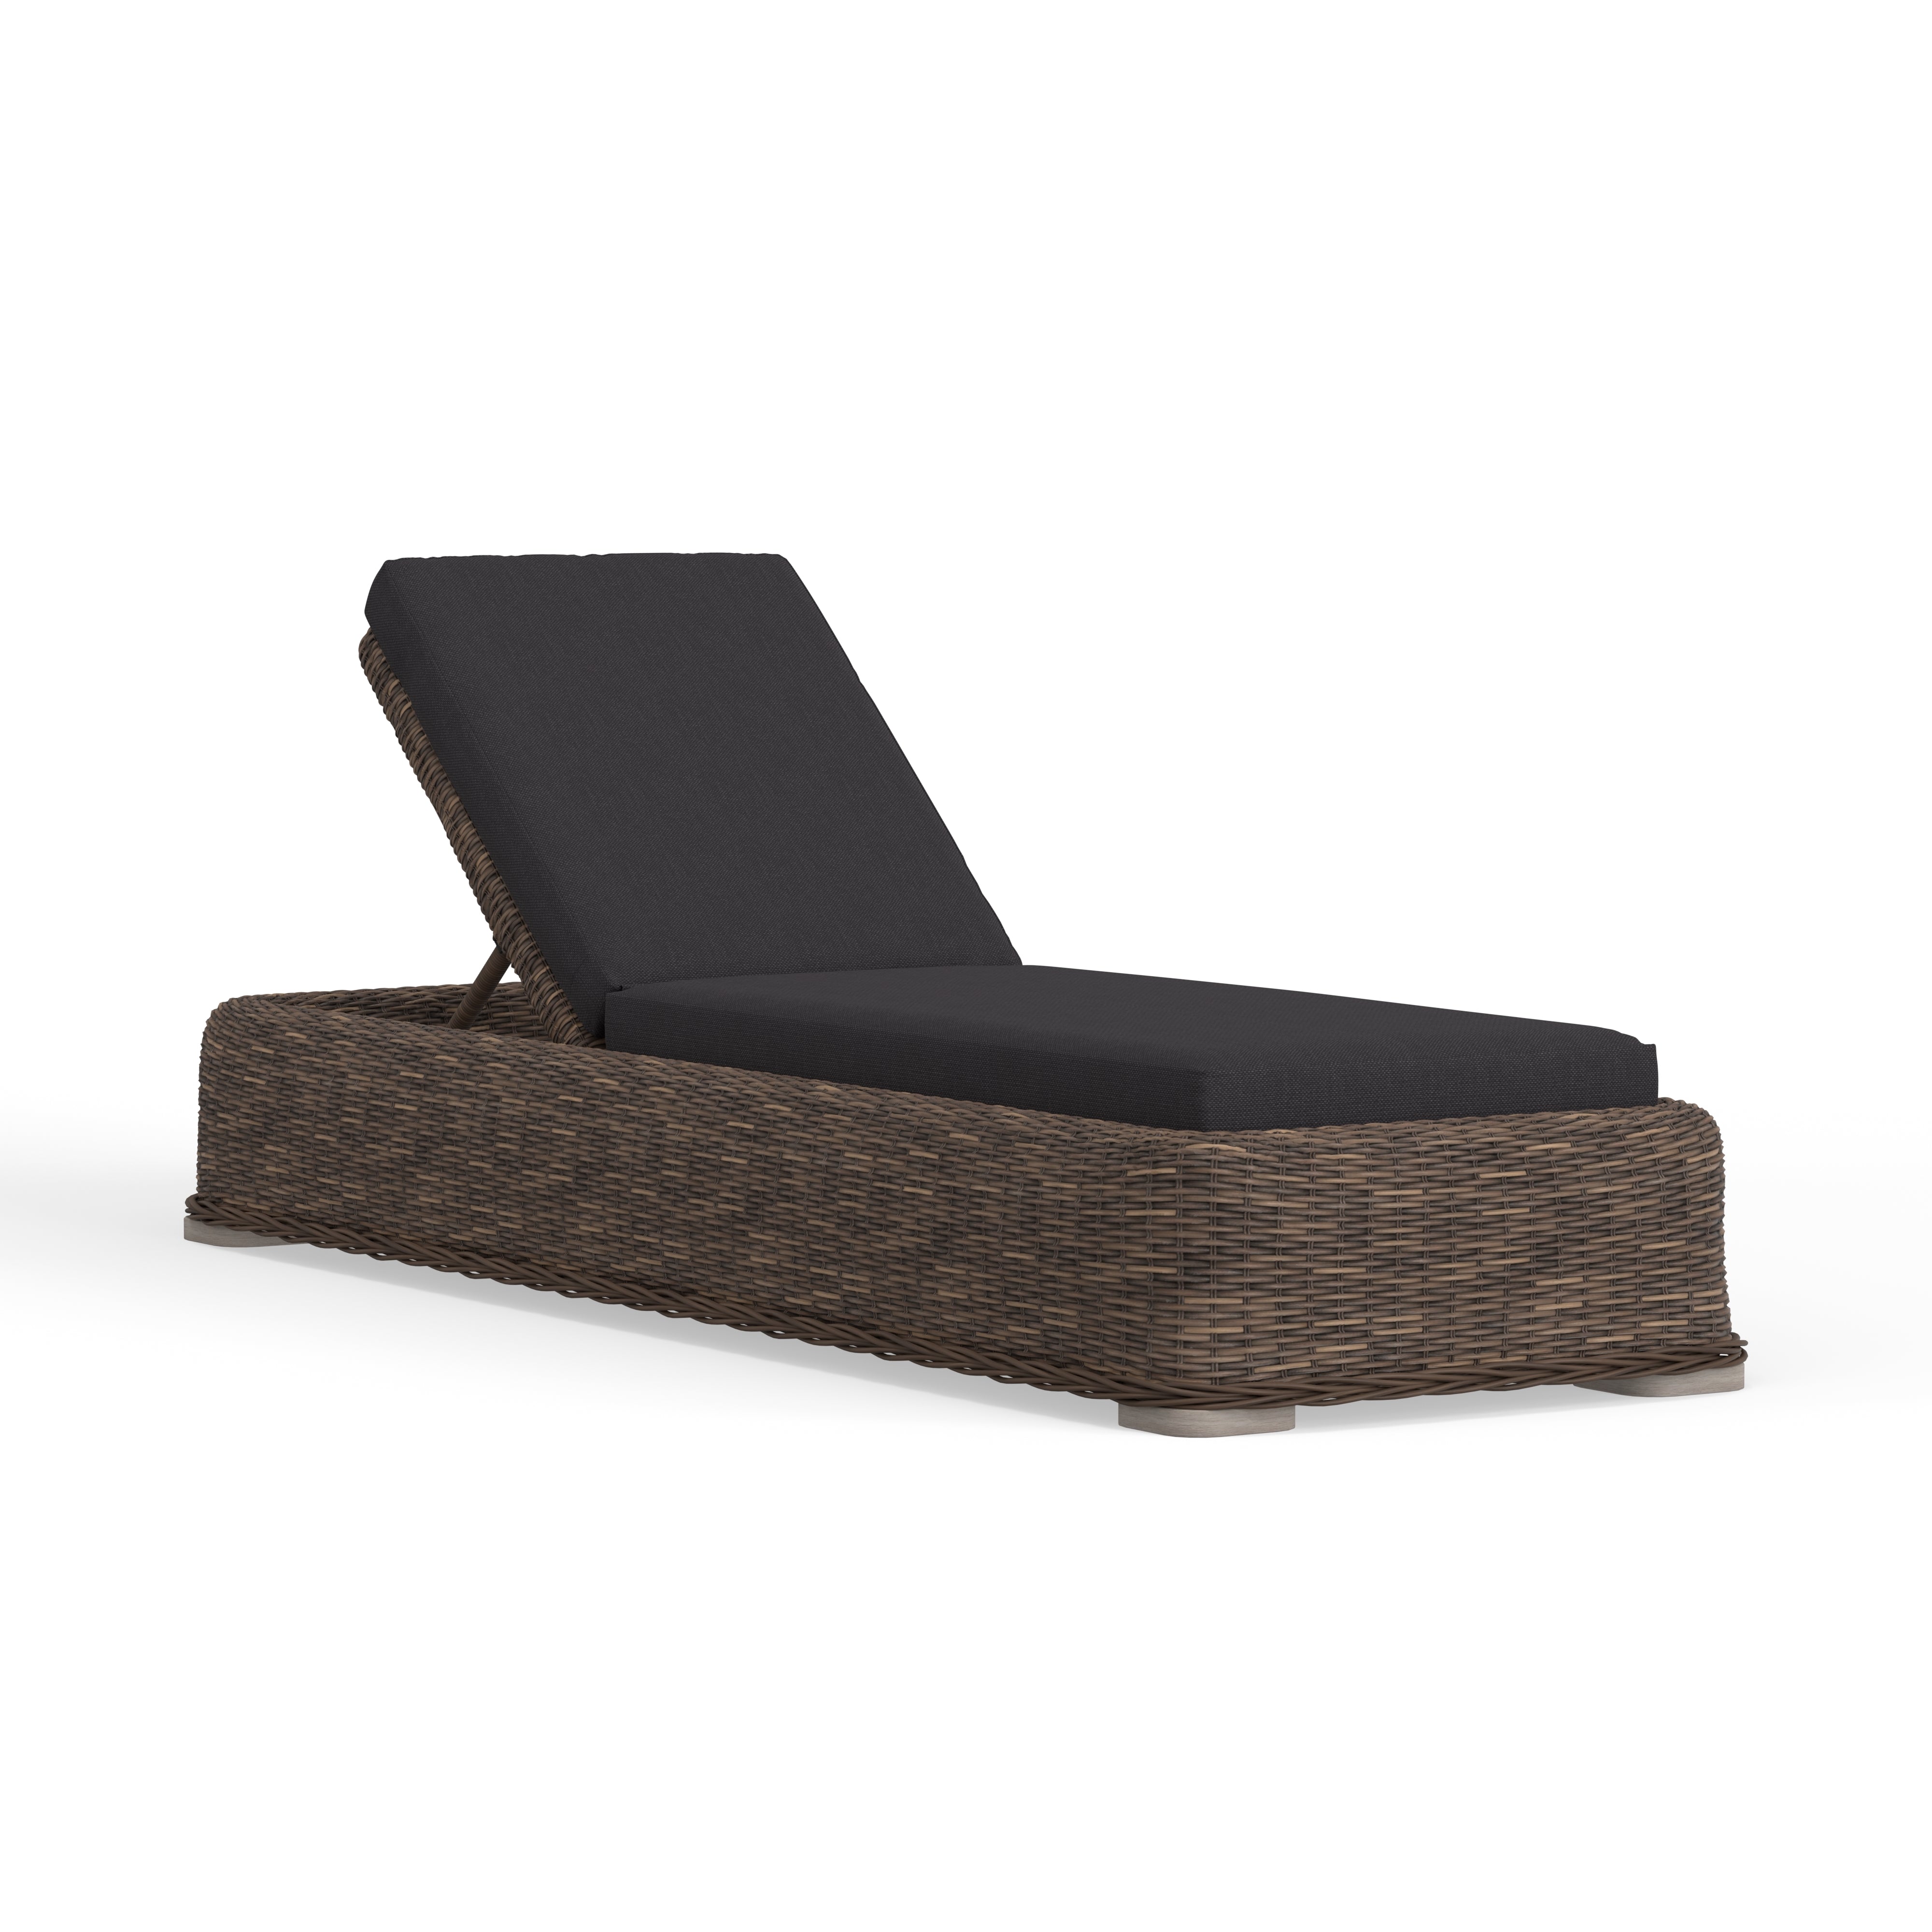 Classic Chaise Lounge In Wicker For Outside